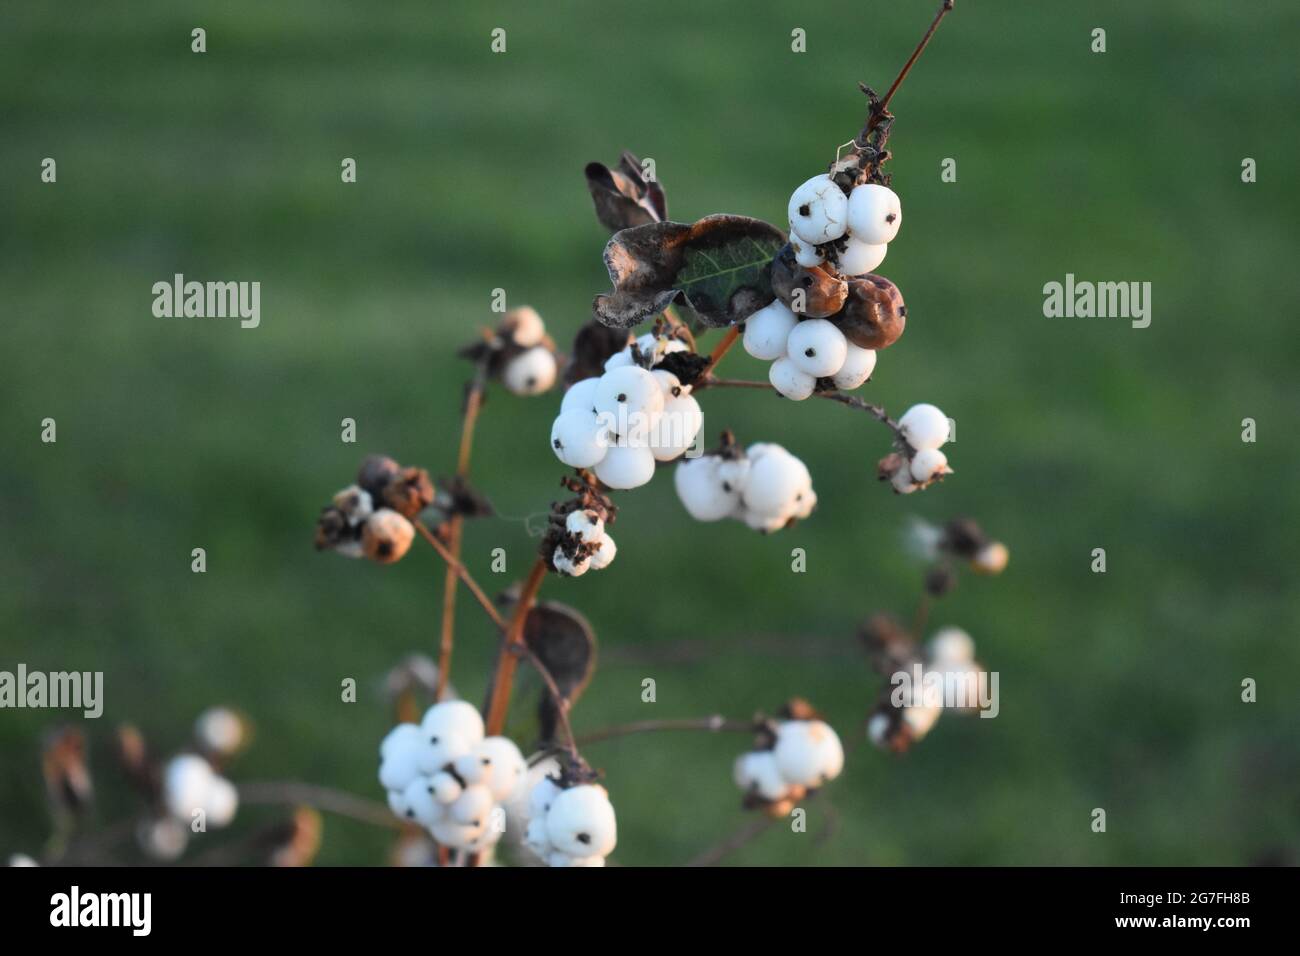 Closeup of the beautiful snowberry plant, aka symphoricarpos, in front of a blurry grass background Stock Photo